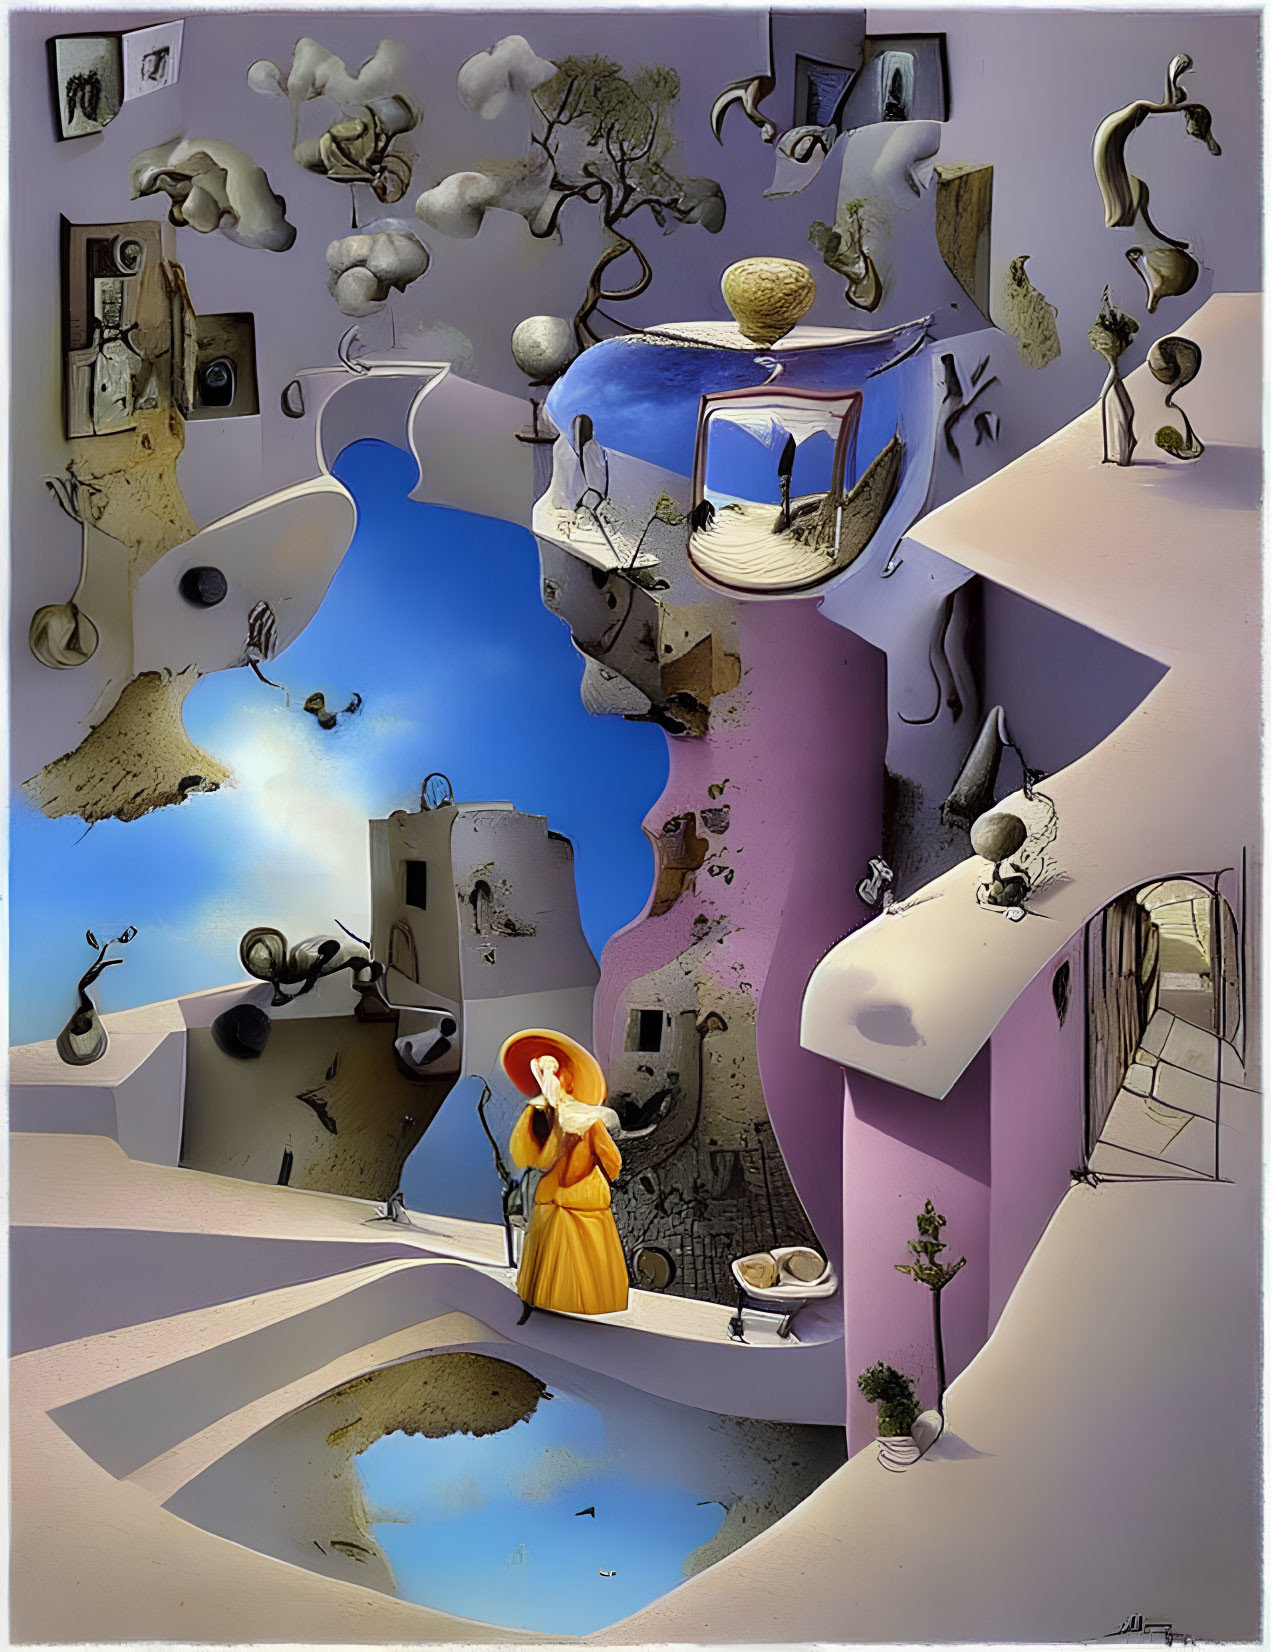 Surreal painting of woman in yellow dress with distorted town and floating elements